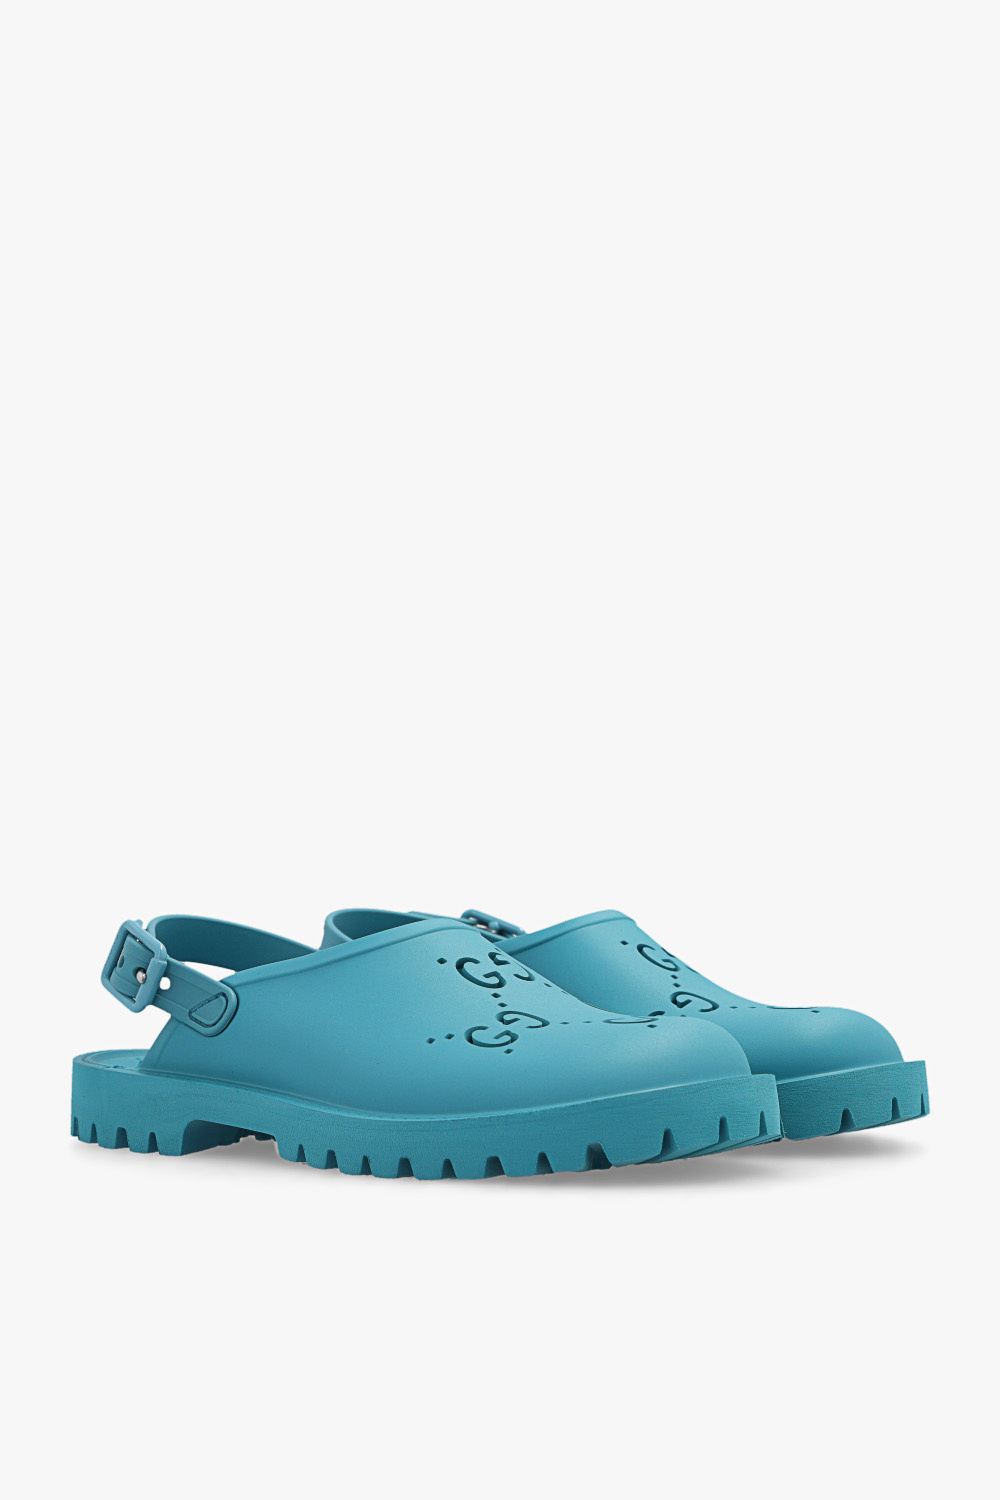 Gucci Kids shoes have with monogram